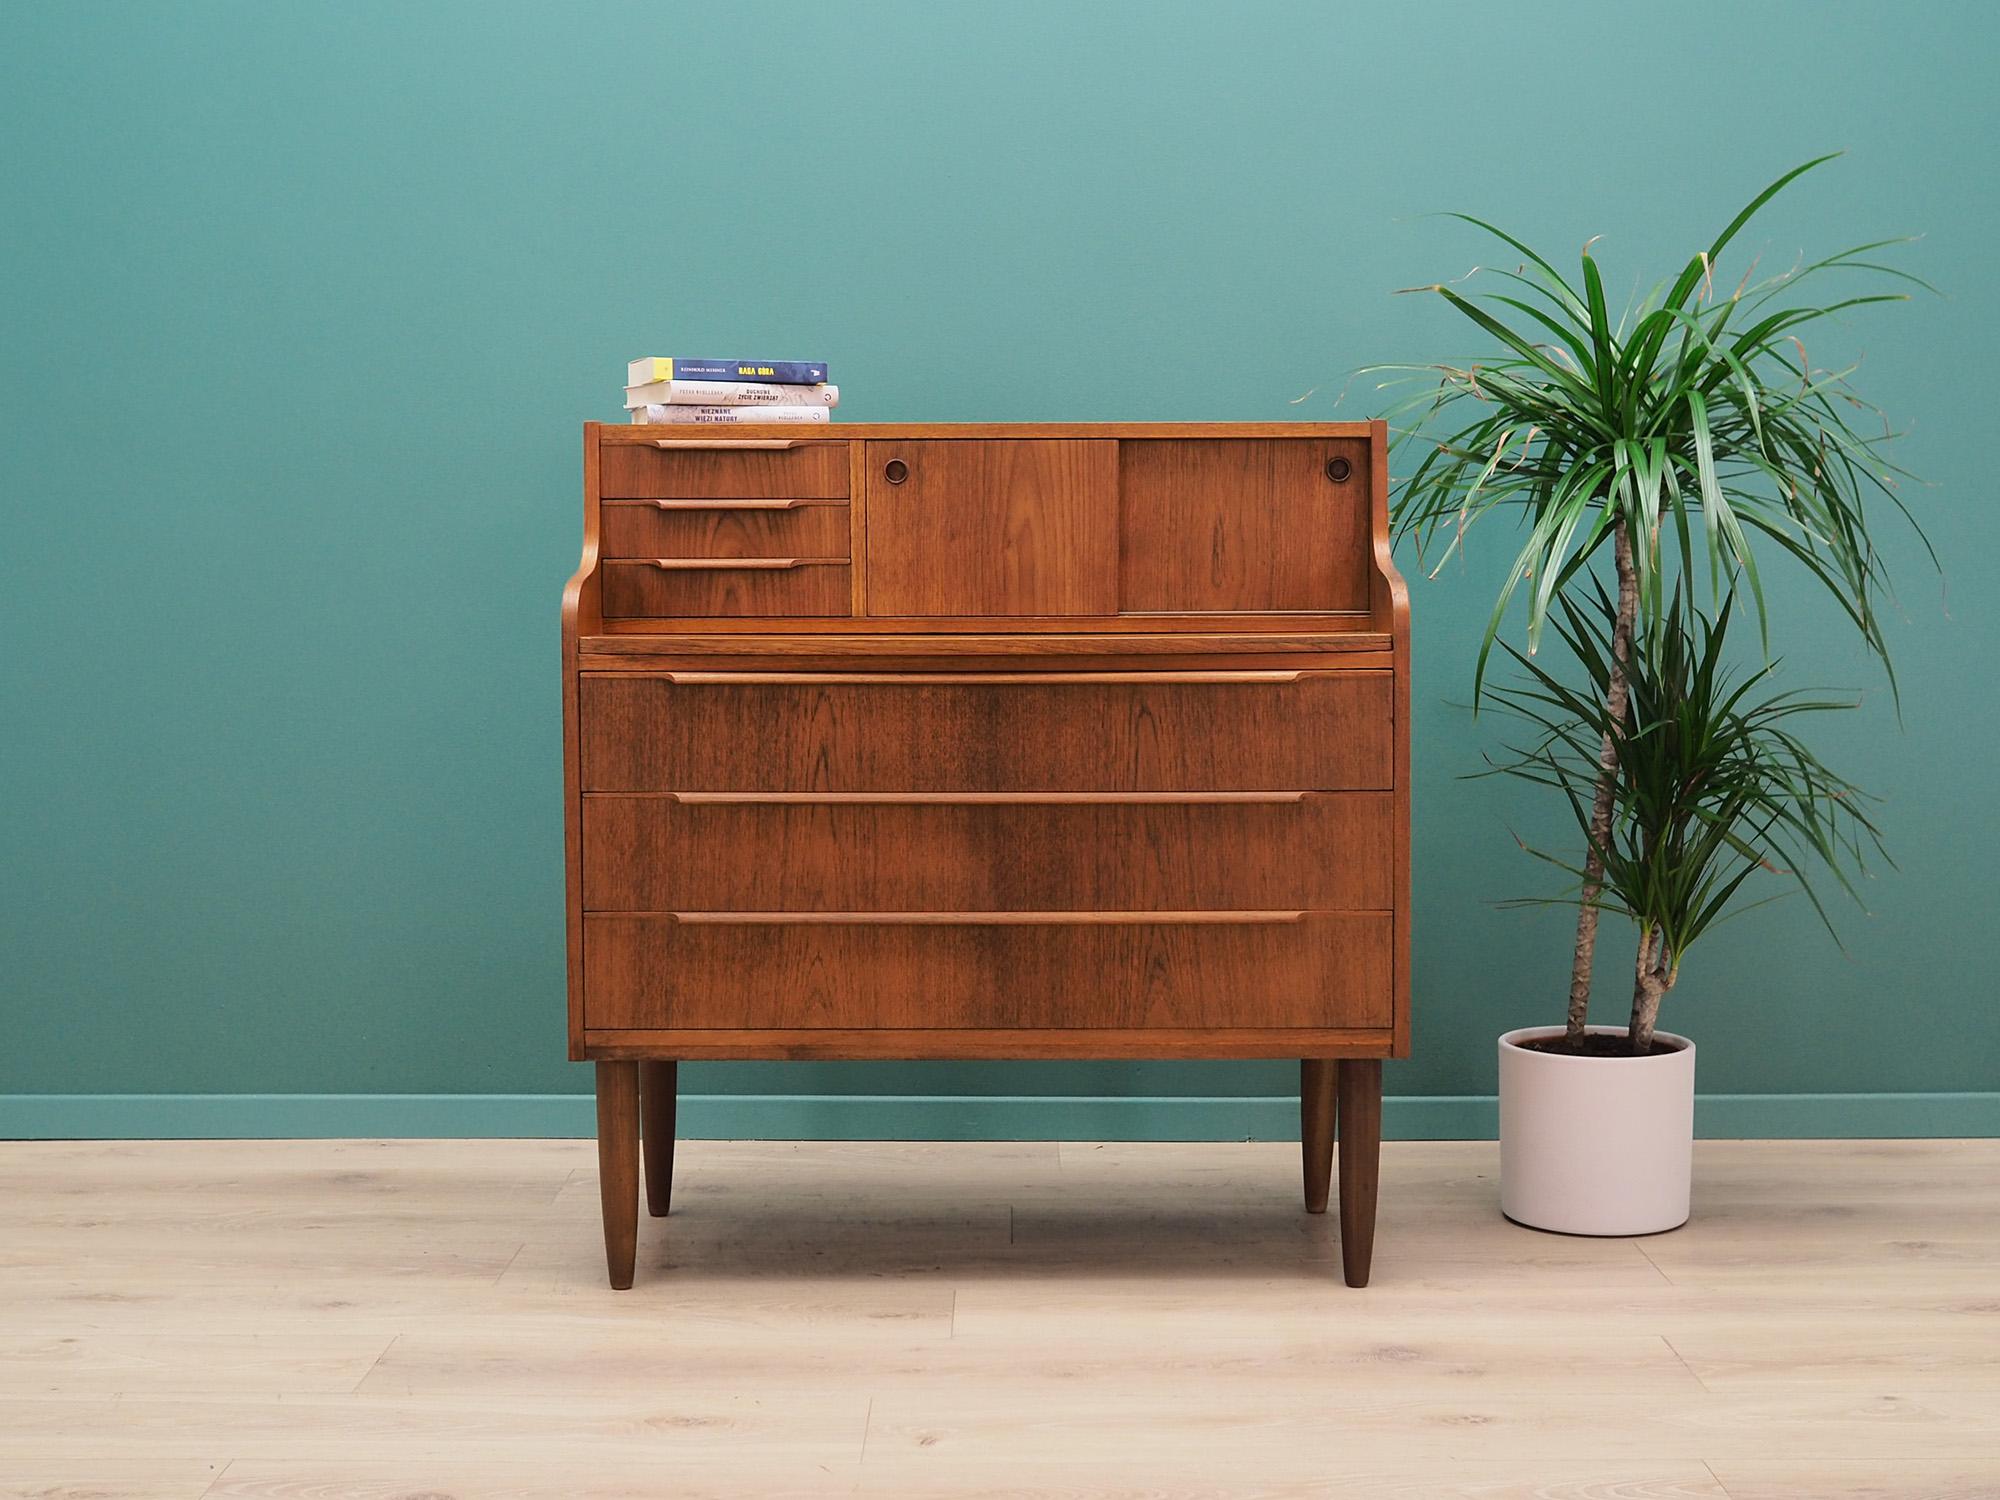 Fantastic secretary from the 1960s-1970s. Scandinavian design, Minimalist form. Furniture covered with teak veneer, legs made of solid teak wood. Secretary has three capacious drawers under the retractable top, above it there are three stylish